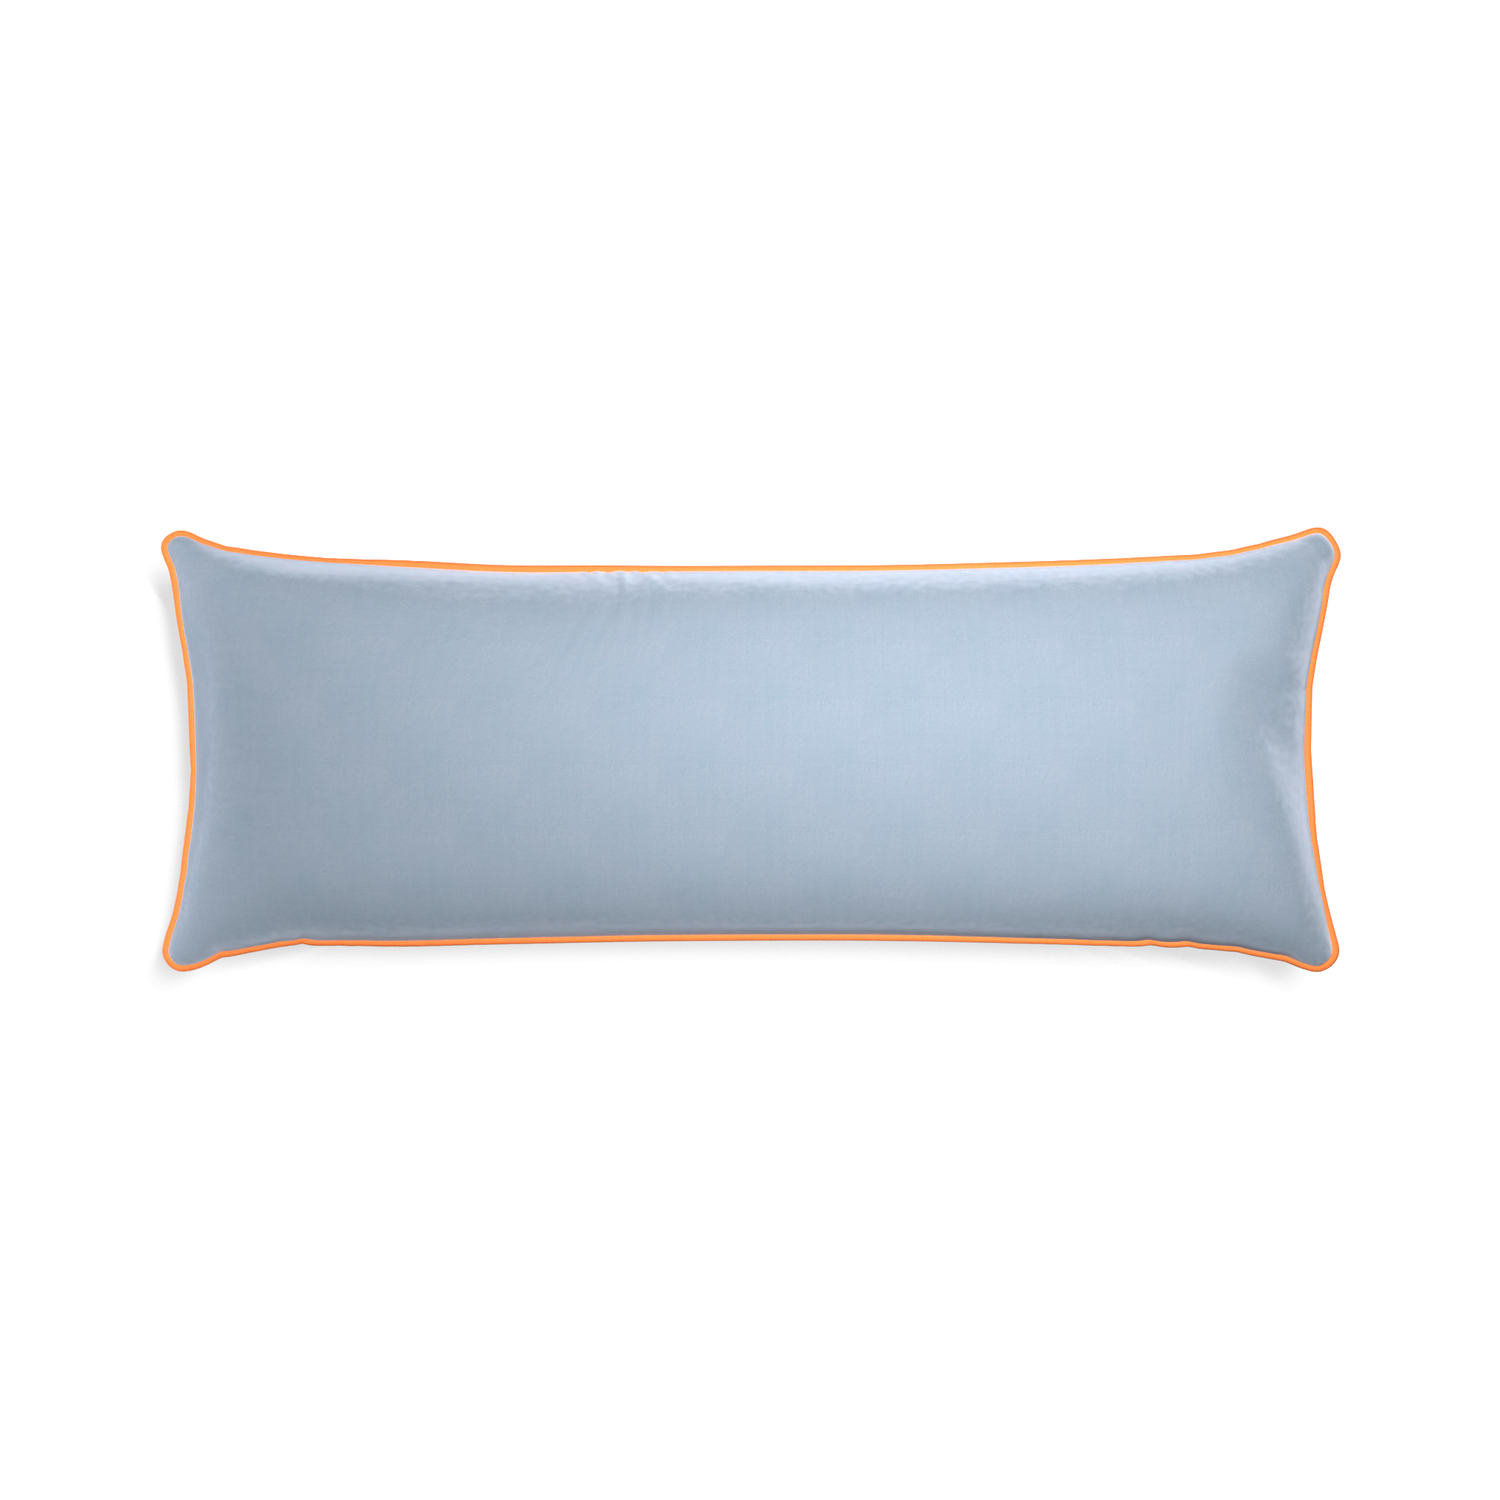 Xl-lumbar sky velvet custom pillow with clementine piping on white background